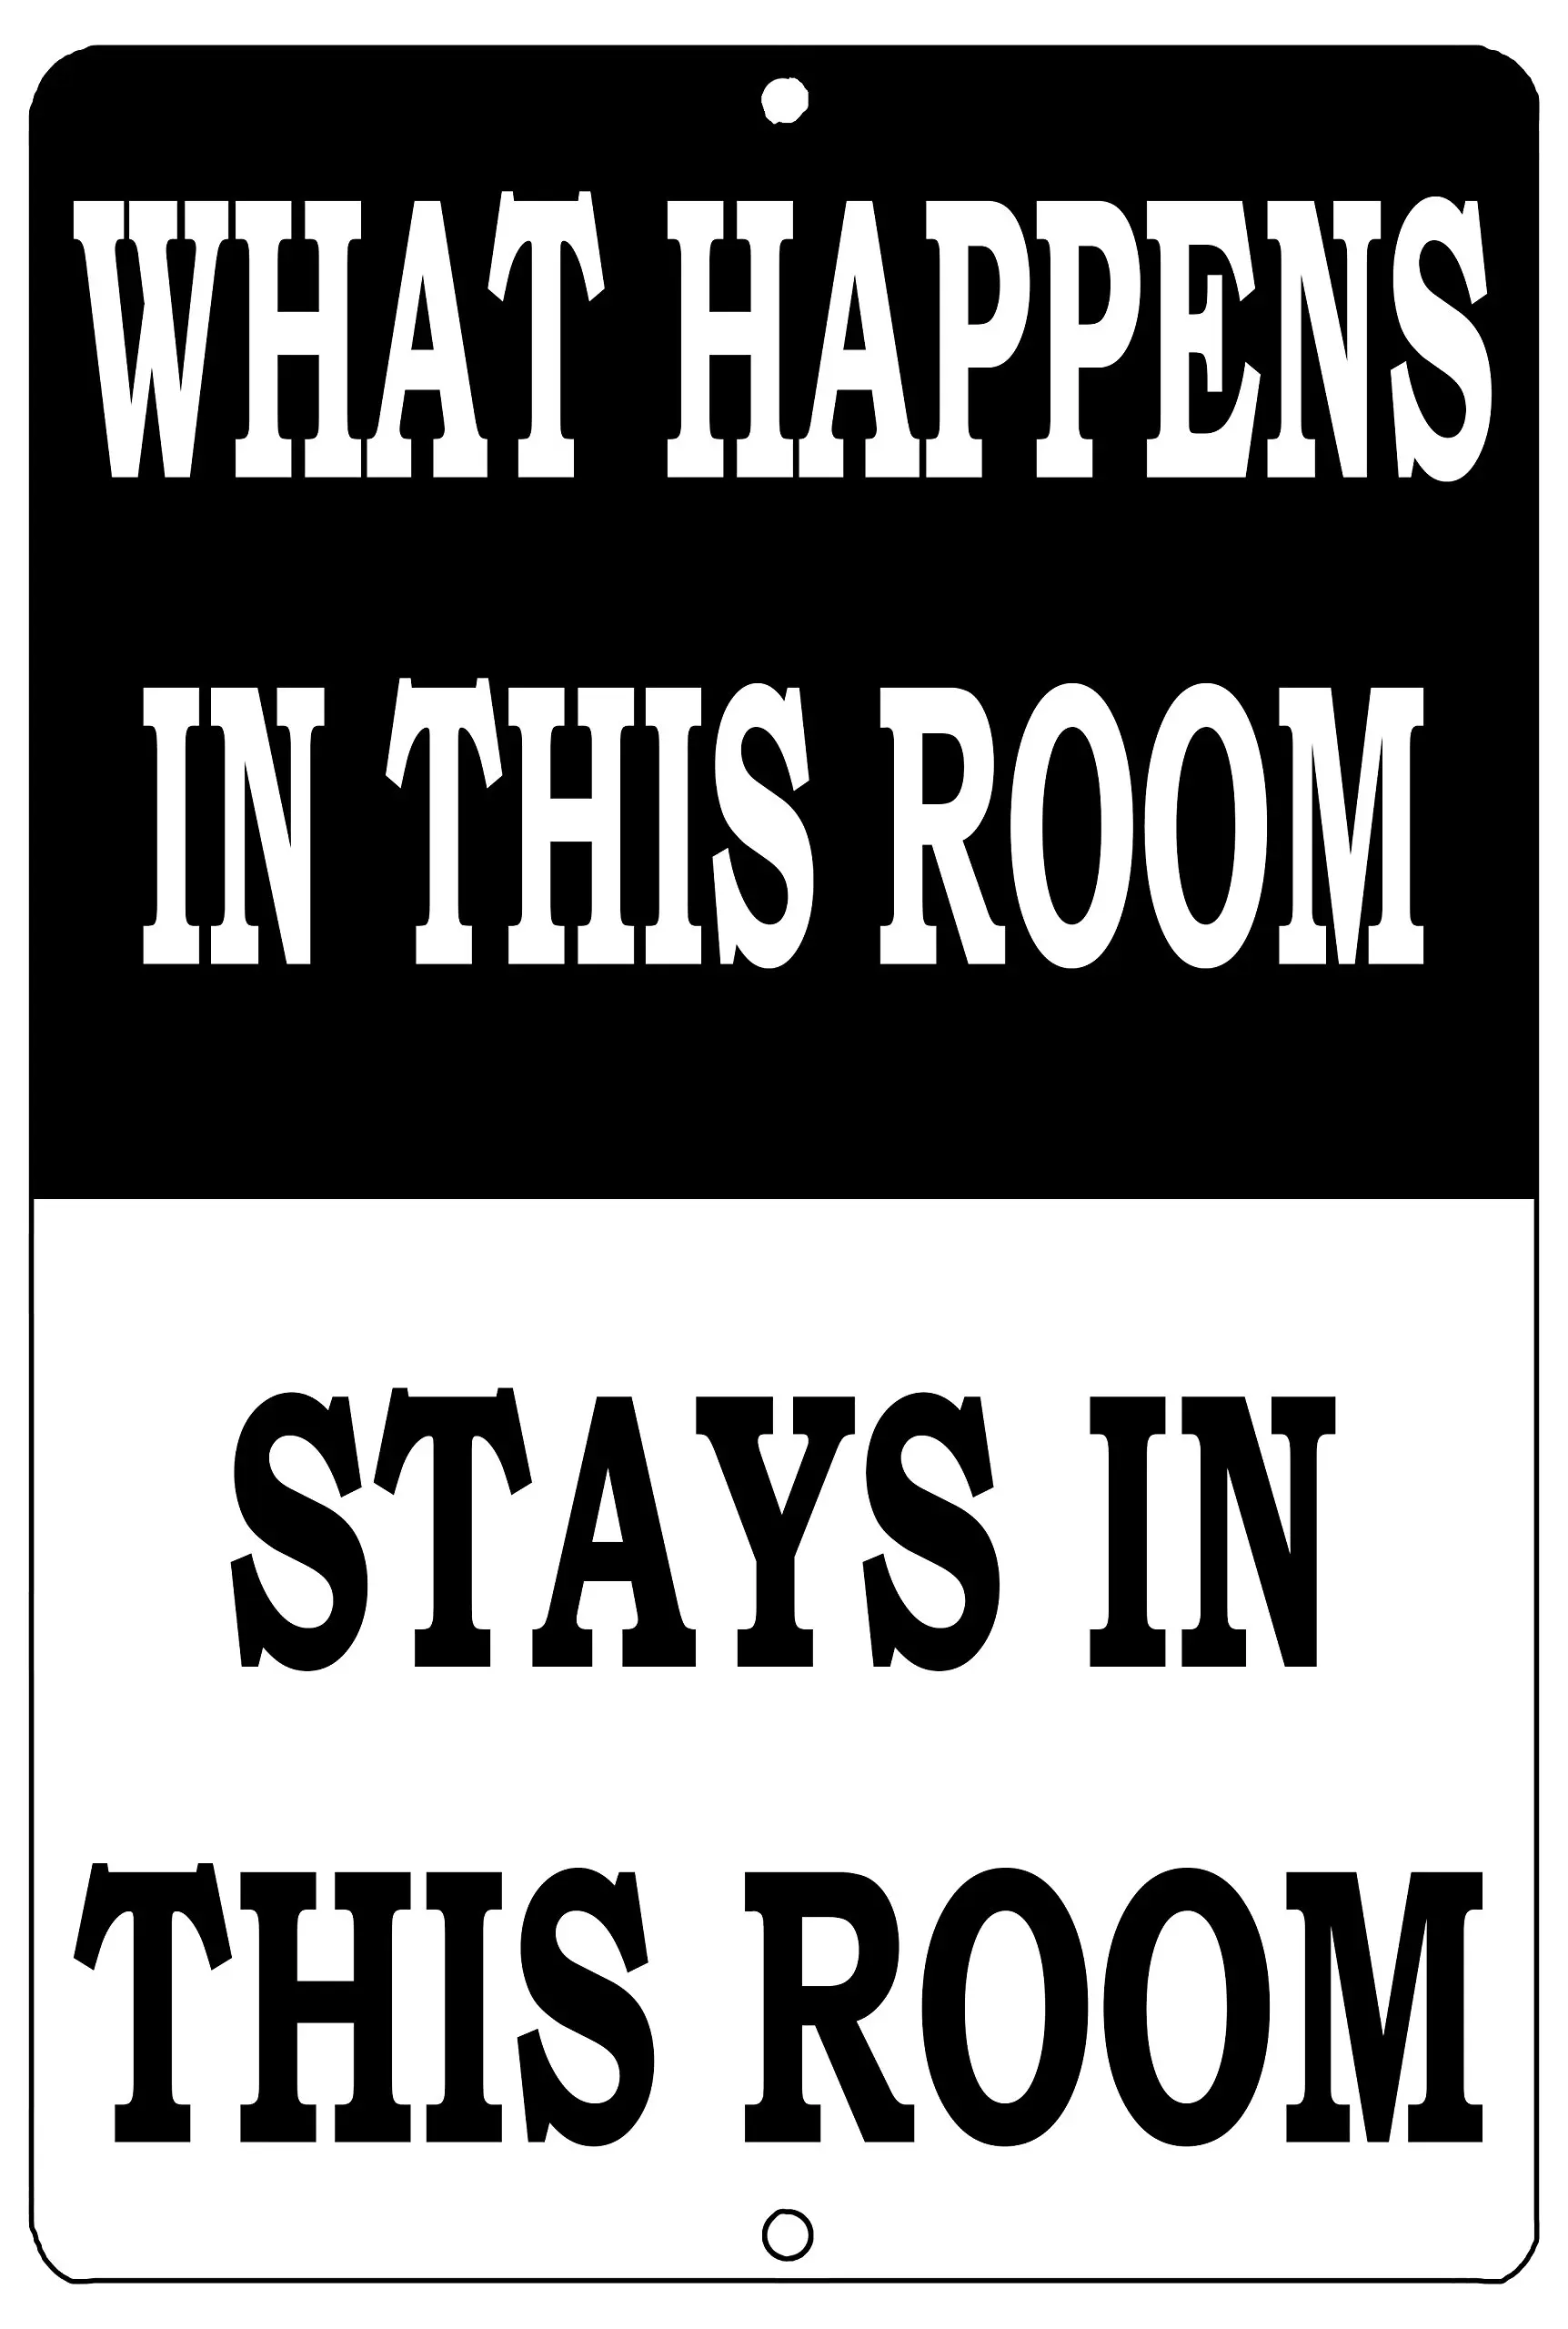 

Funny Metal Tin Sign Wall Decor Man Cave Bar Home Bedroom Door What Happens in This Room Stays in This Room